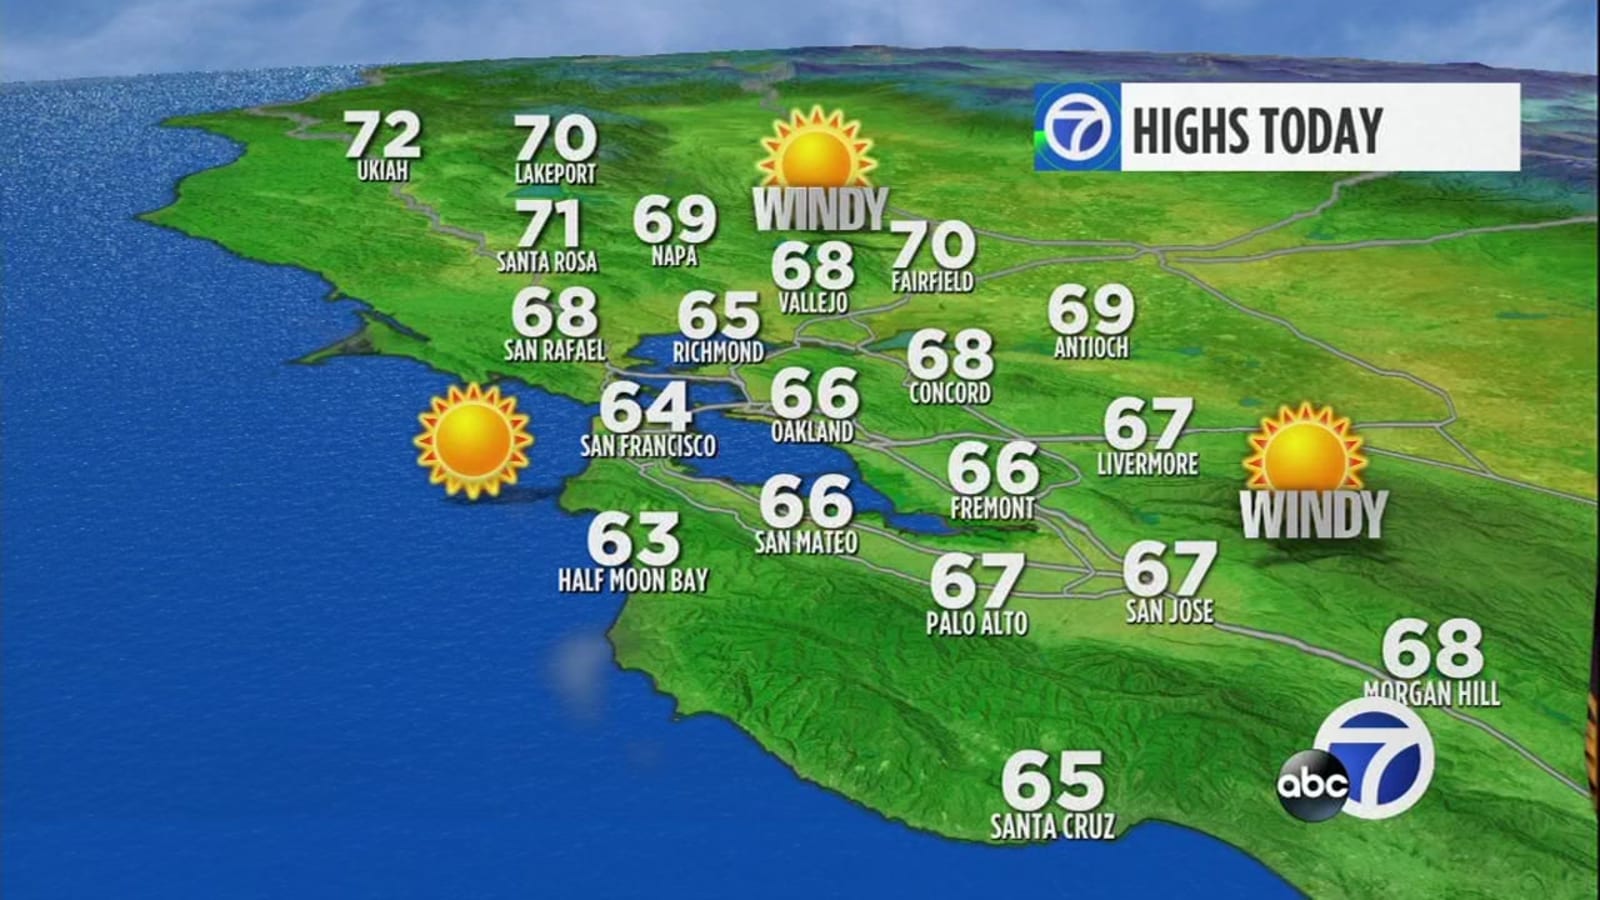 Accuweather Forecast For San Francisco, San Jose, Oakland, - Abc7 - HD Wallpaper 